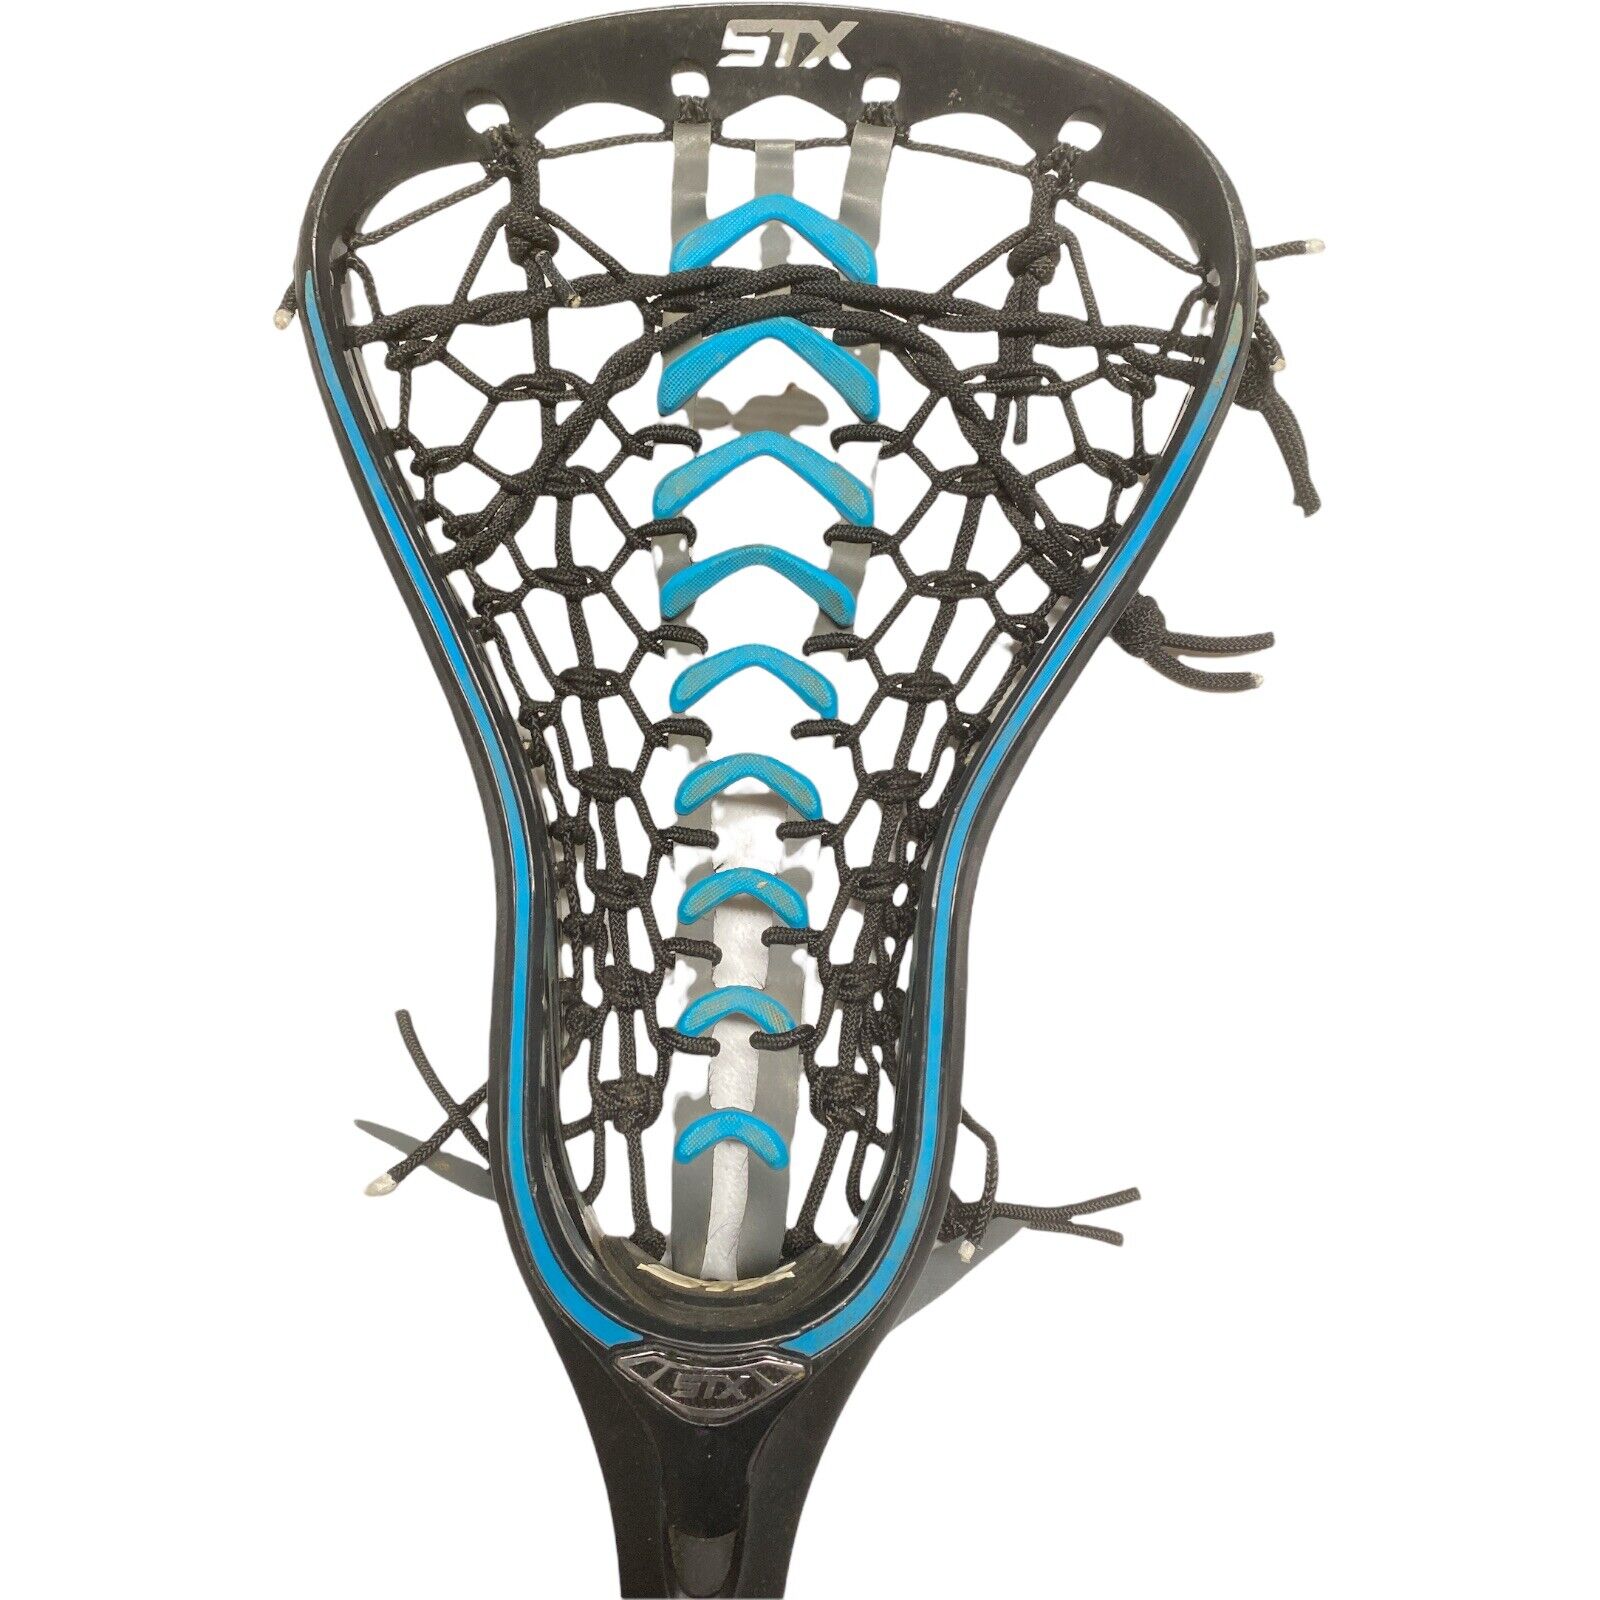 STX Fortress Spring new work one after another 300 On Composite Shaft Lacross Blue Max 53% OFF Stick Black 42”